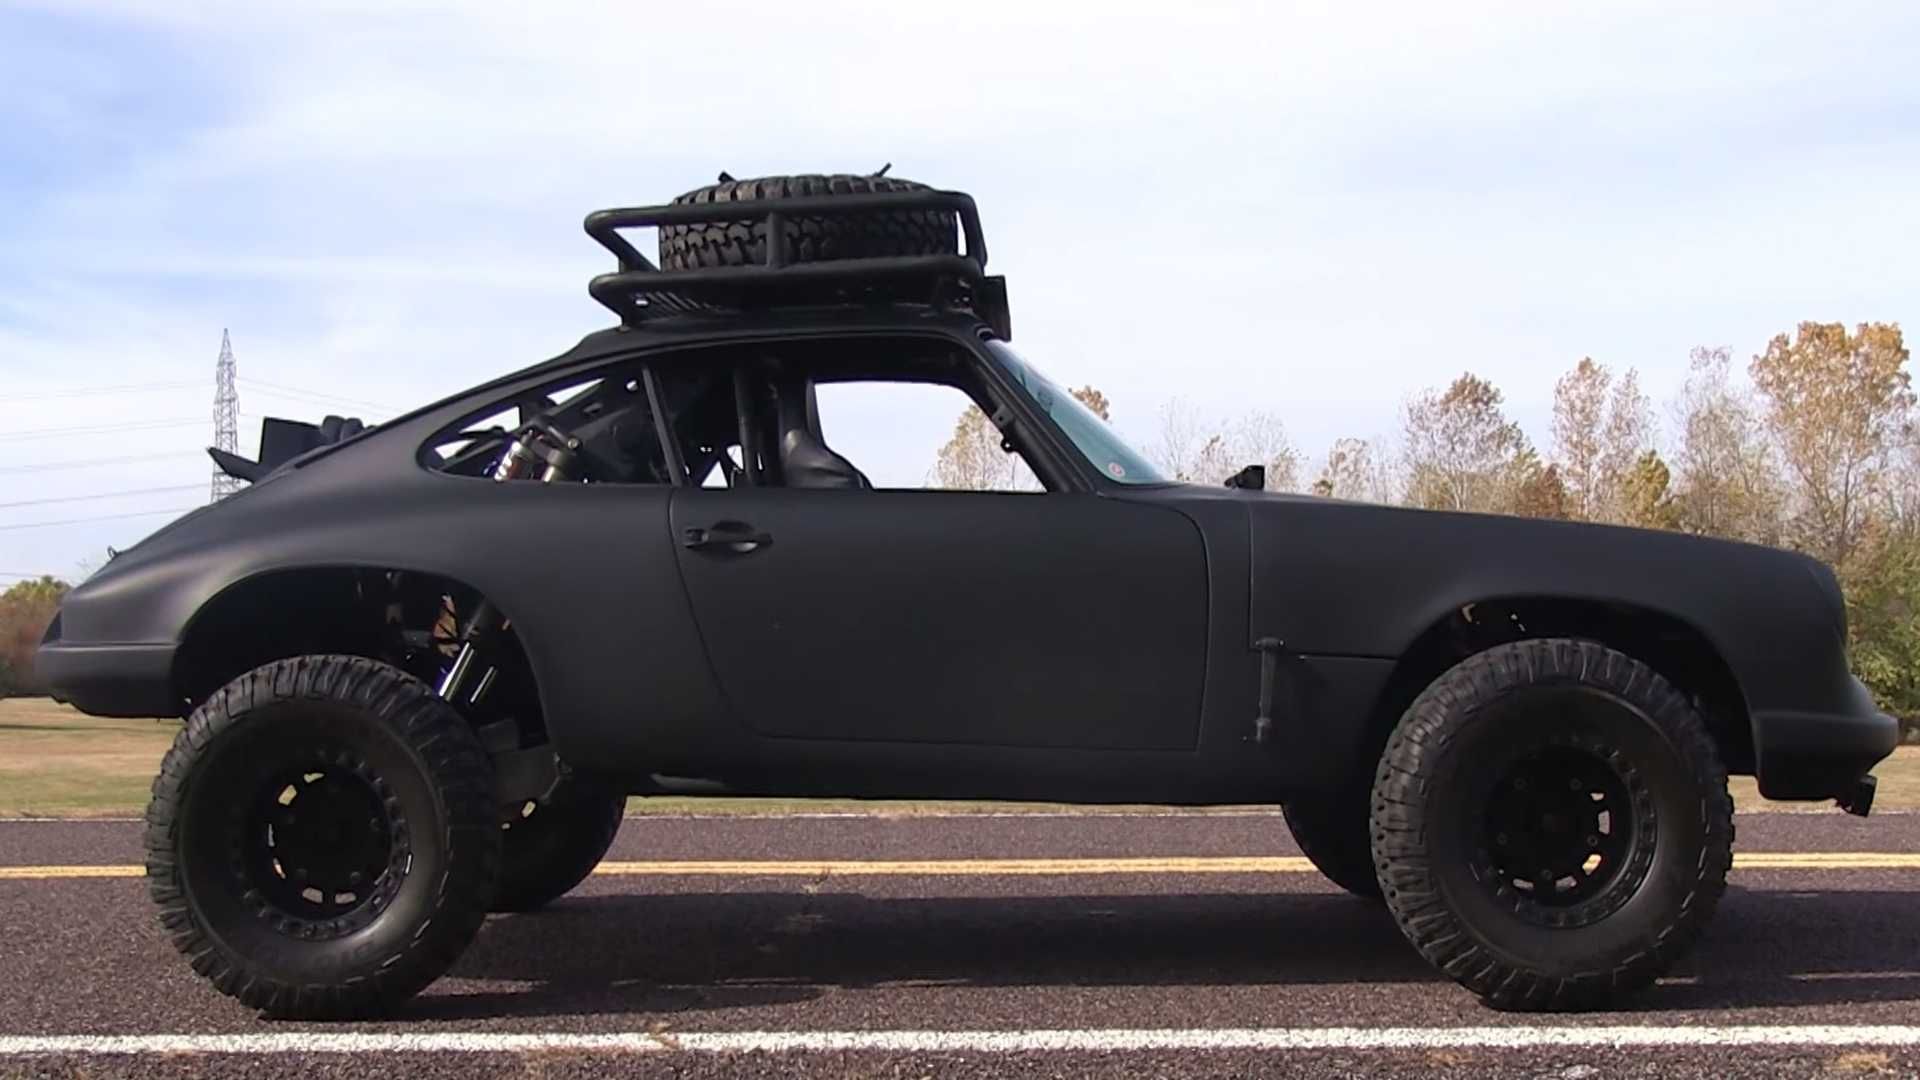 Custom Porsche 911 Buggy Laughs At America's Crumbling Infrastructure